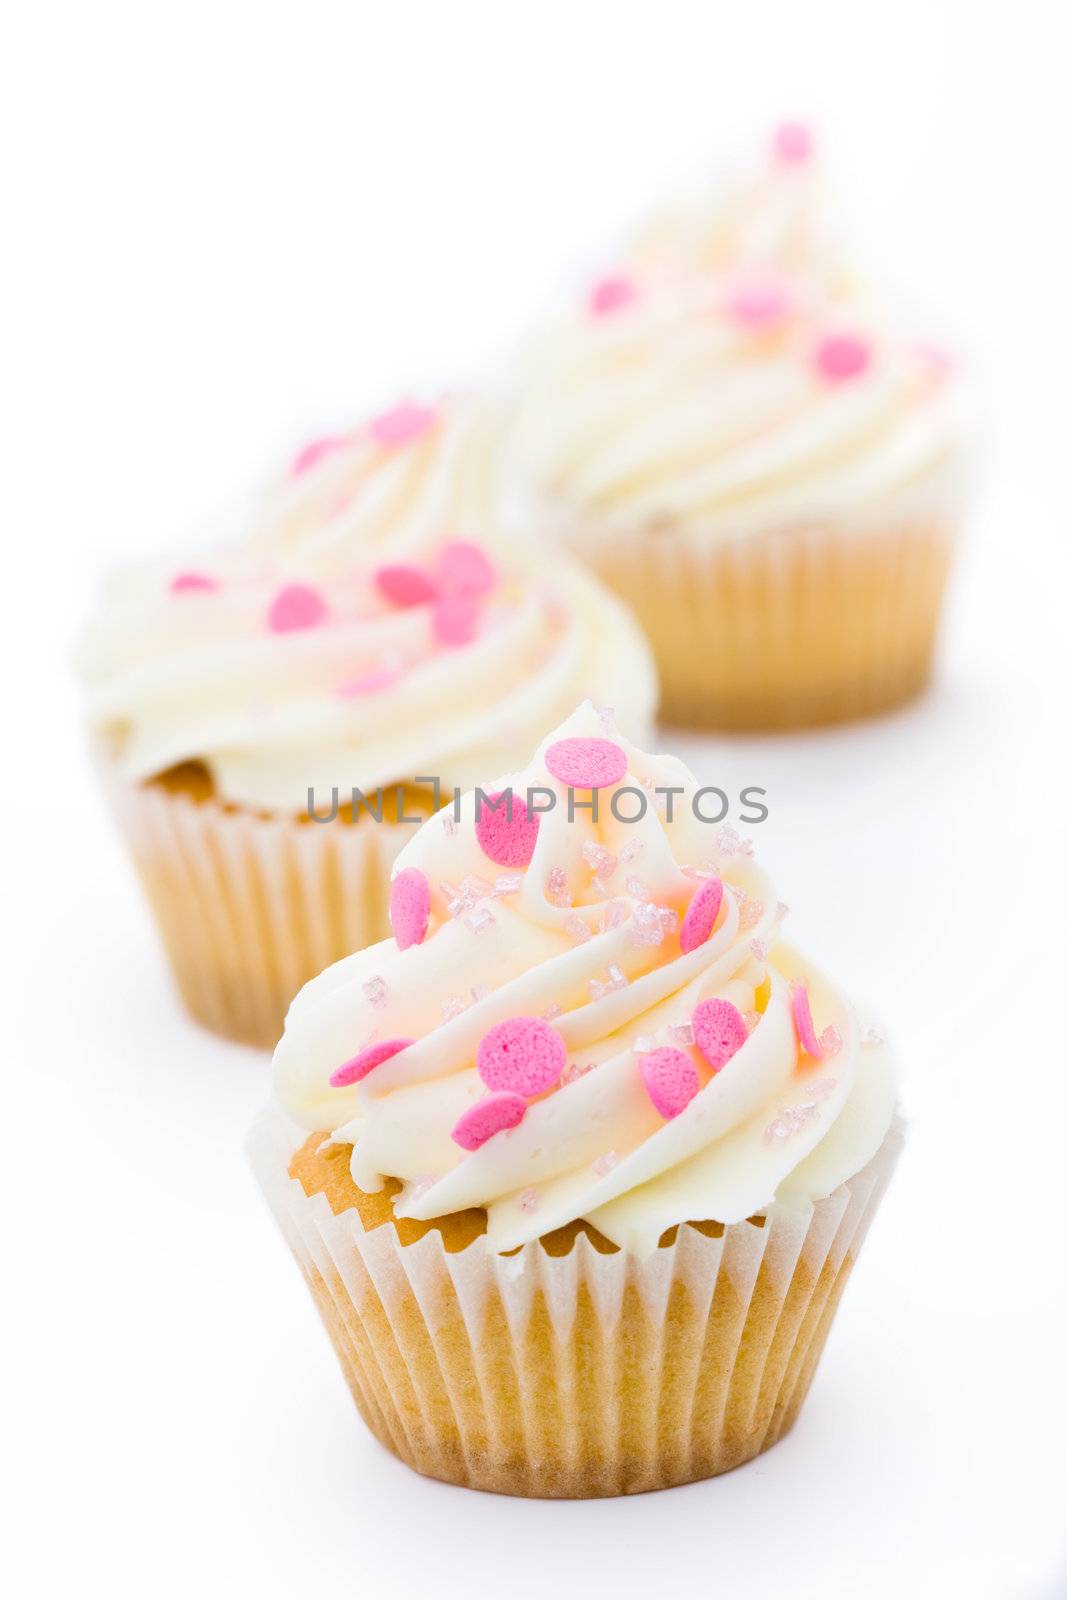 Trio of pink and white cupcakes against a white background